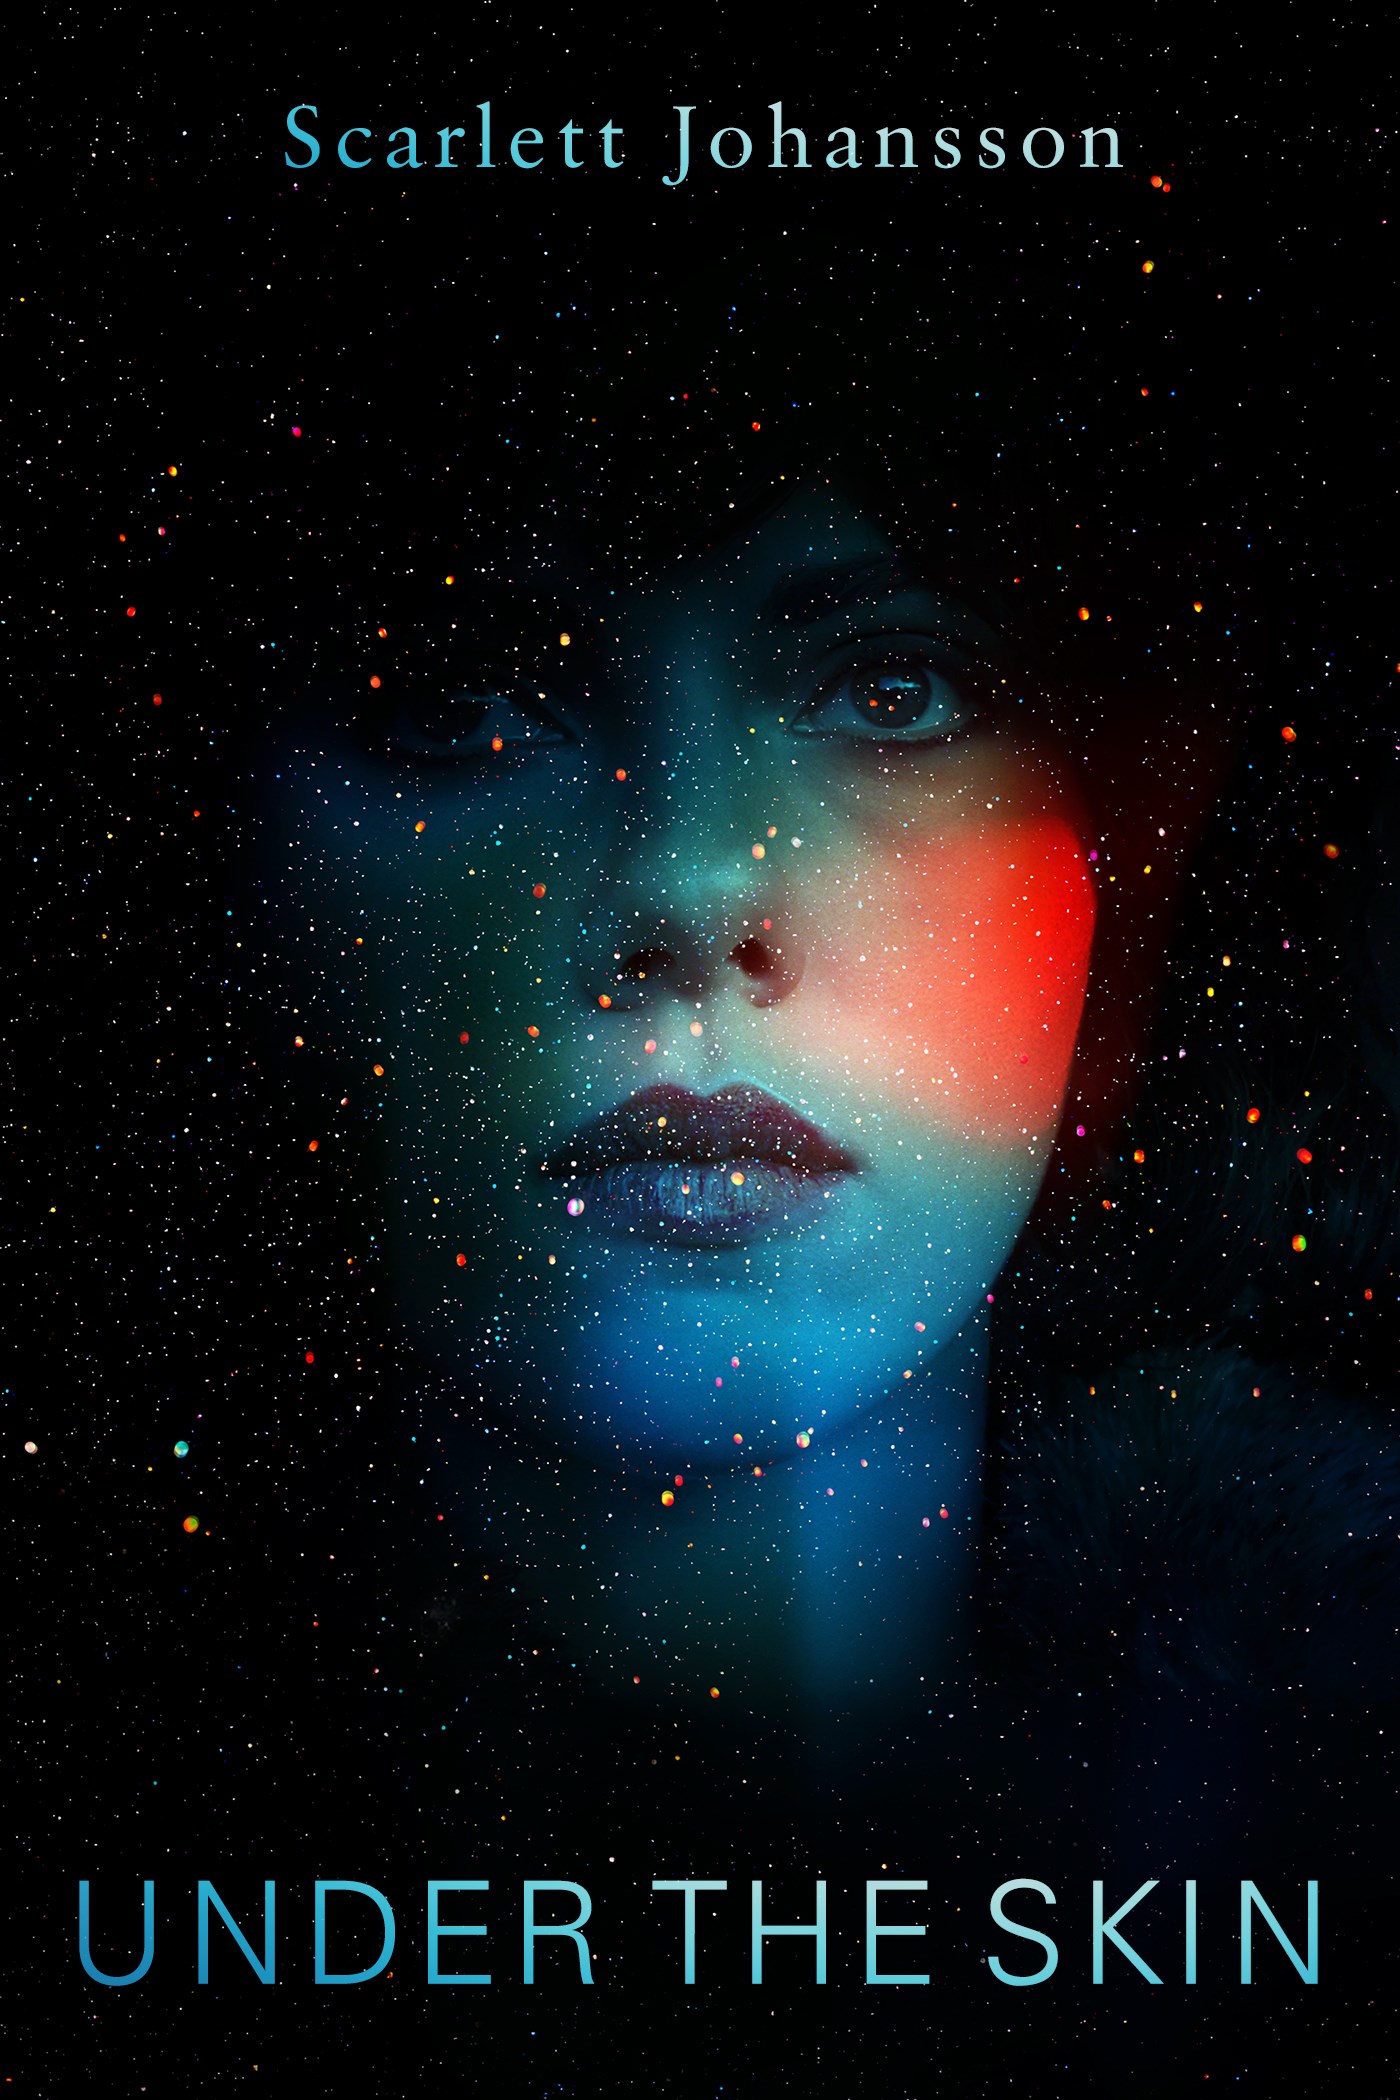 Under the Skin,' starring Scarlett Johansson, now on DVD and Blu-ray  (review) 